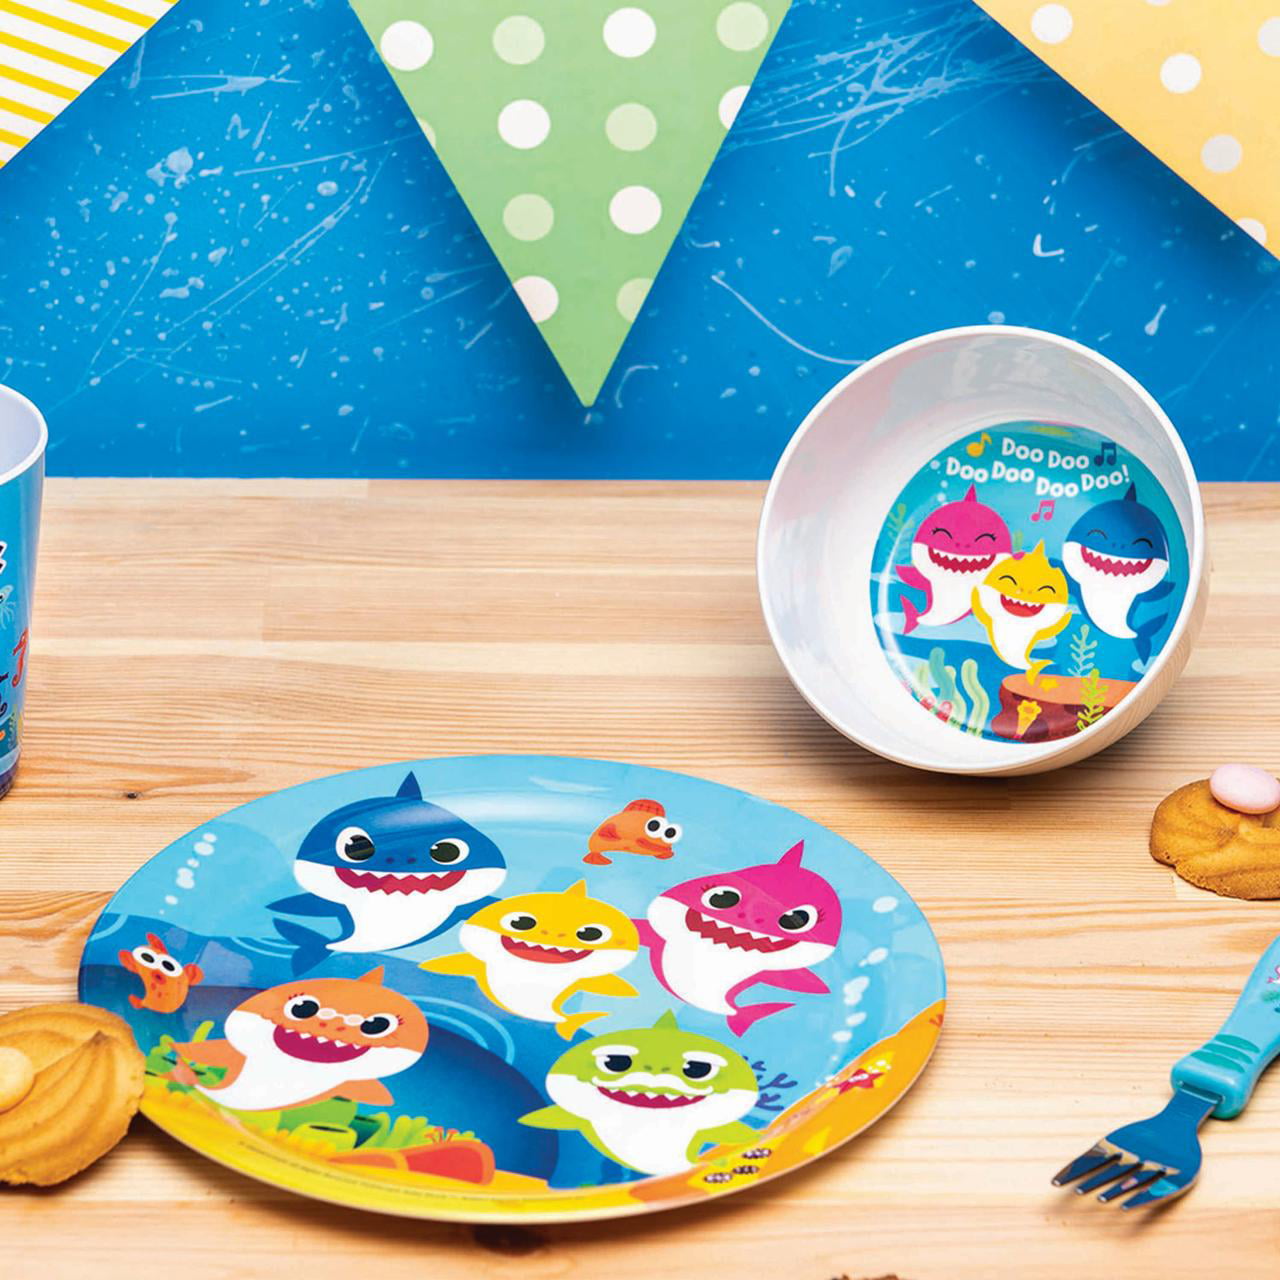 Kids Baby Shark 3 Piece Plate Bowl Cutlery Mealtime Set  3 Yrs New 